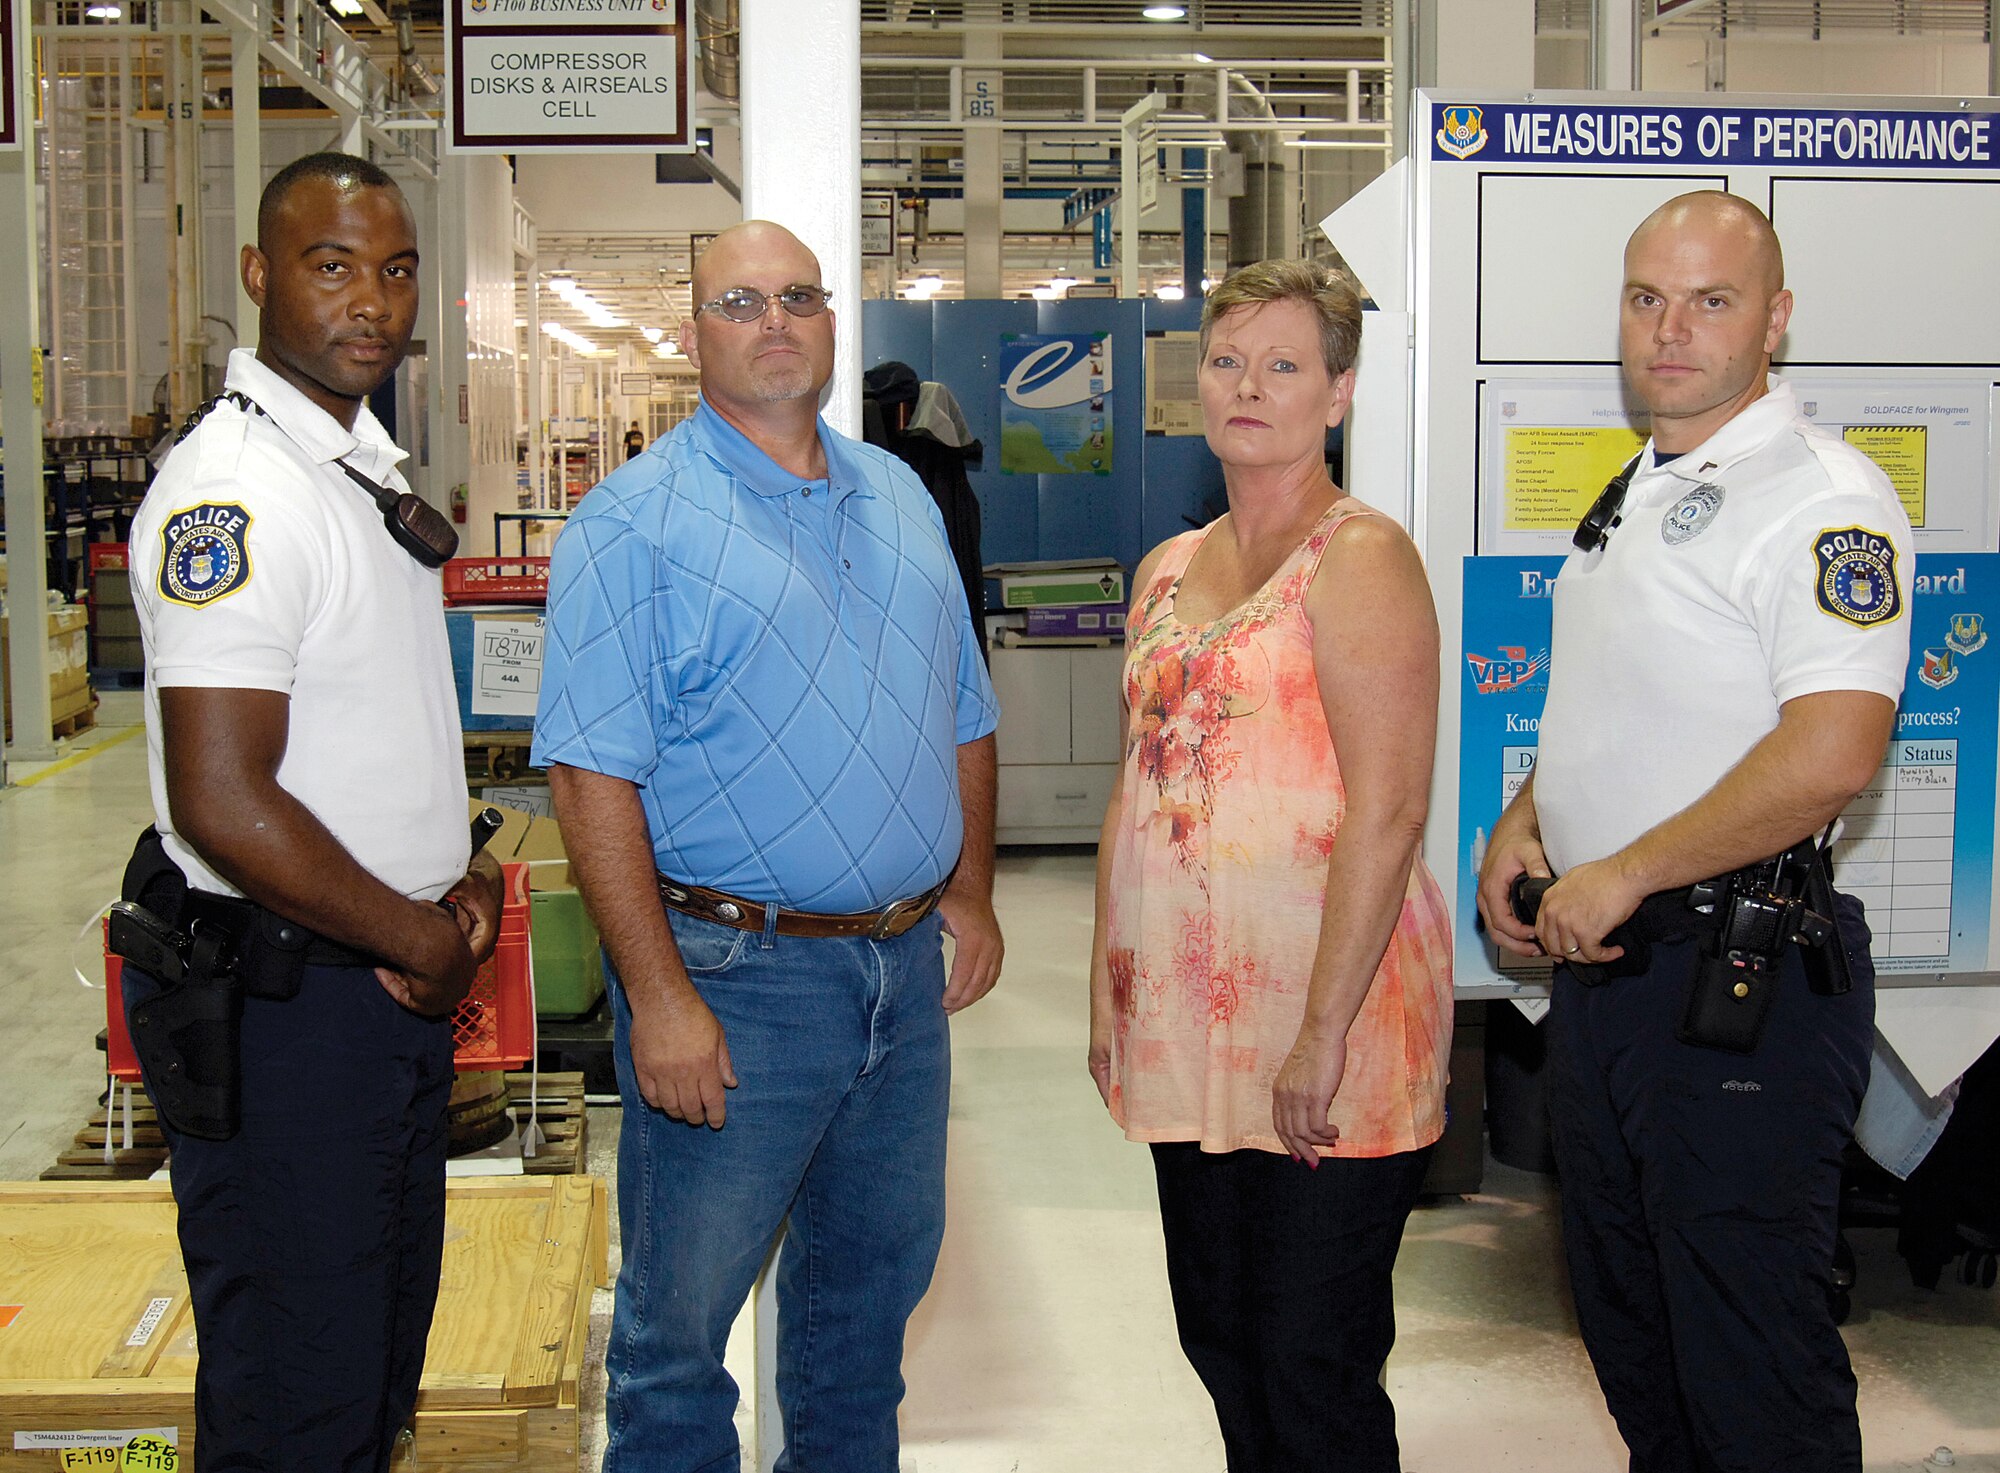 Tech. Sgt. Keith Hagins, 72nd Security Forces Squadron; Rodney Walker and Cheryl Sweeney, both of the 544th Propulsion Maintenance Squadron; and officer Aaron Whitehead, 72nd SFS, from left, acted instinctively, demonstrating the highest example of being Wingmen when they saved the life of a 544th PMXS co-worker found June 18 crumpled on the floor of his Bldg. 3001 work area, shown behind them in the F100 Compressor Cell. (Air Force photo by Margo Wright)